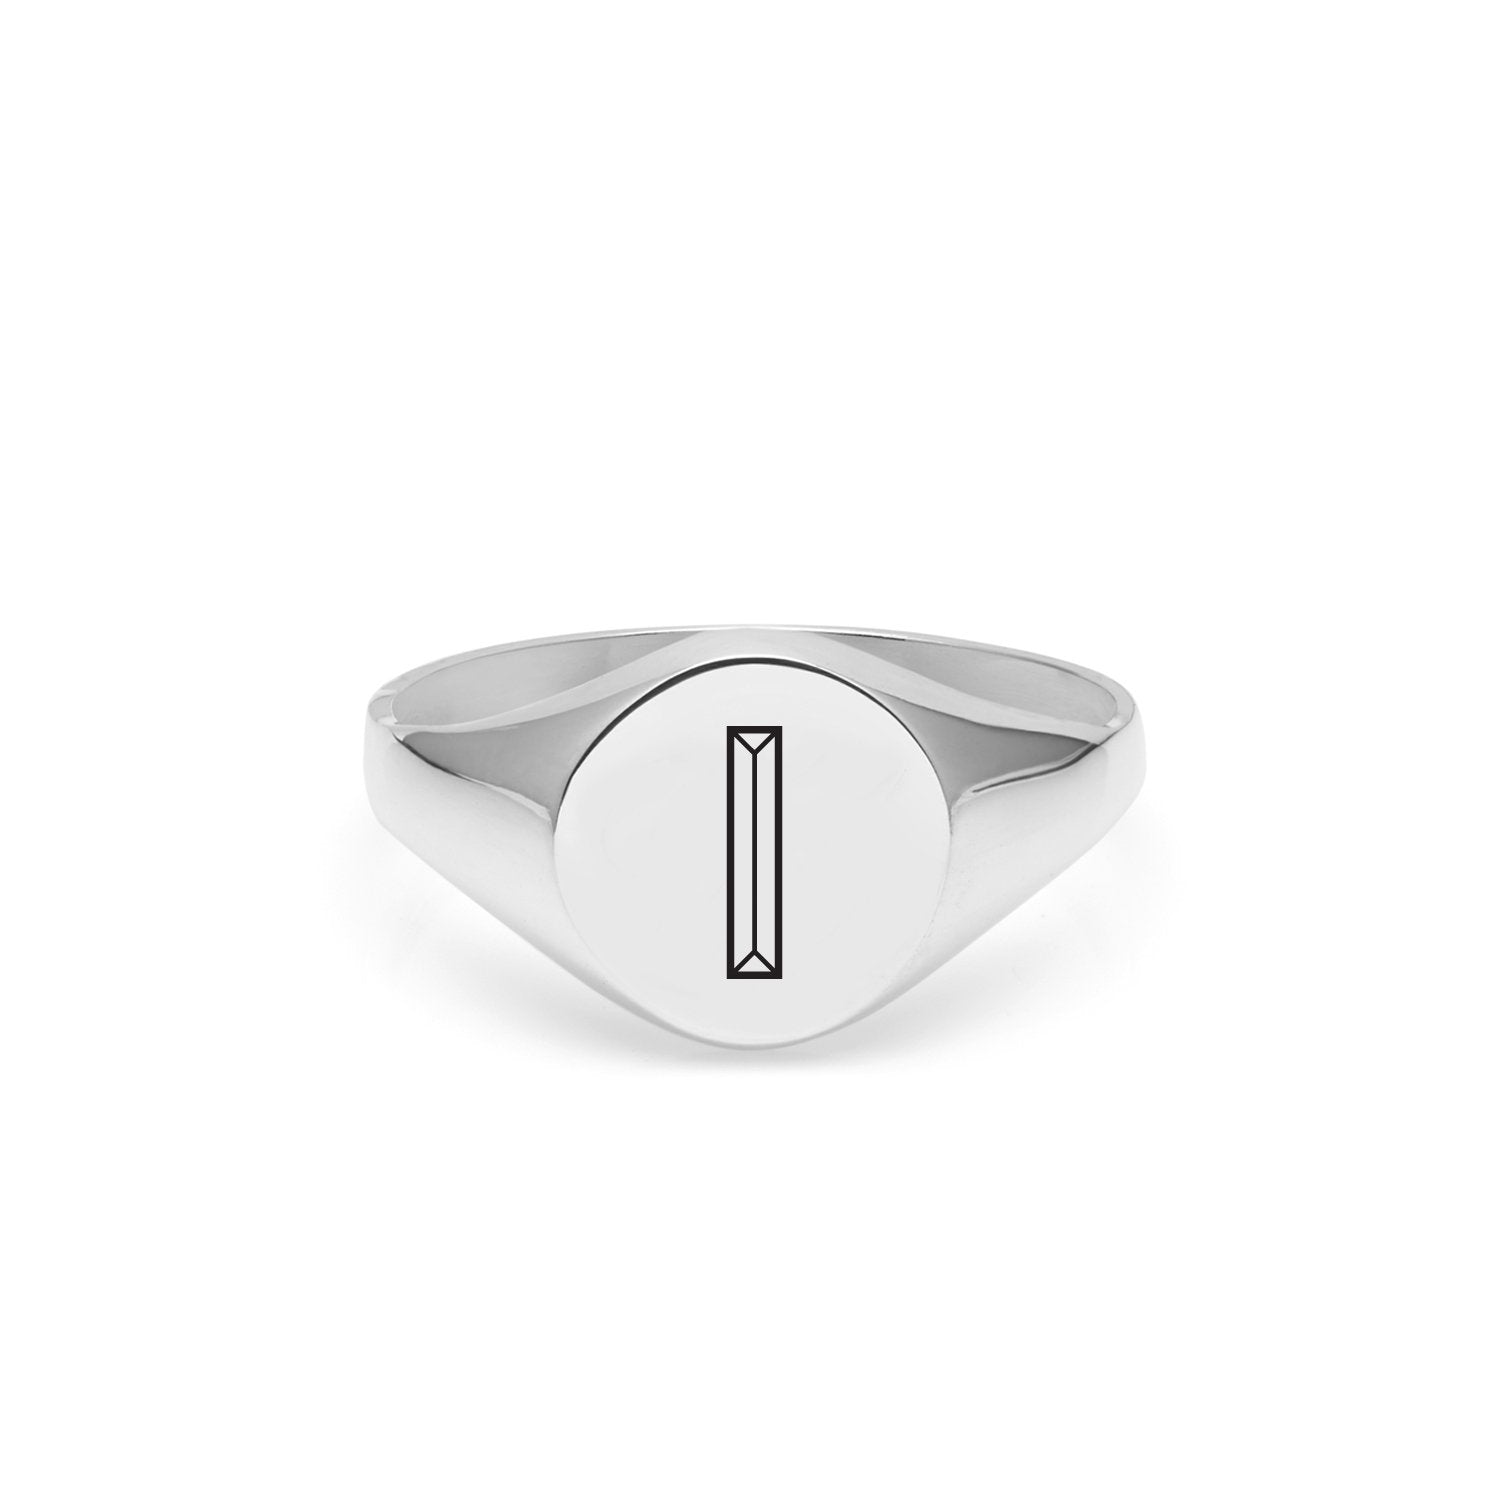 Facett Initial I Round Signet Ring - Silver - Myia Bonner Jewellery